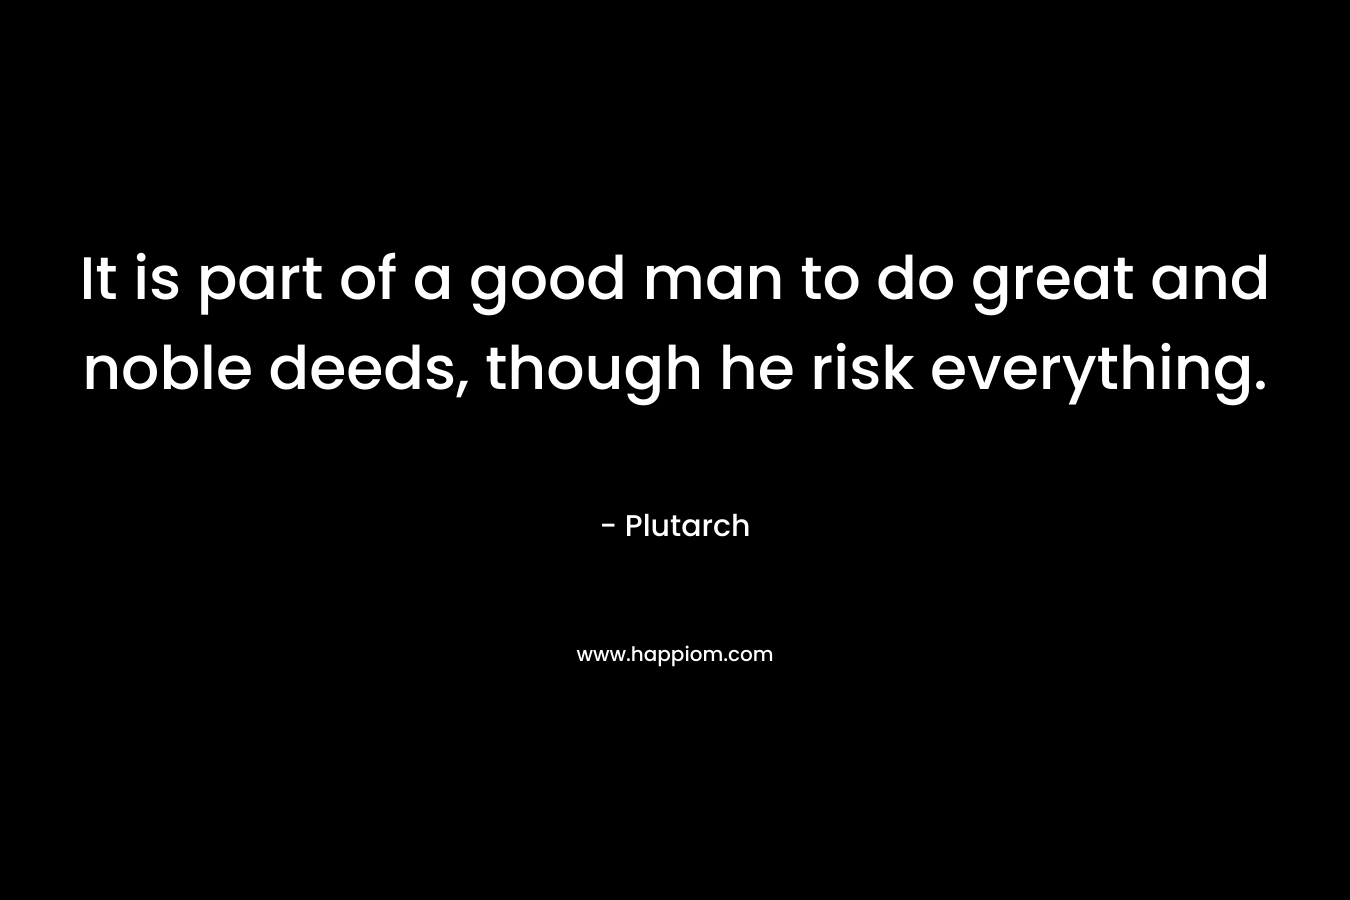 It is part of a good man to do great and noble deeds, though he risk everything. – Plutarch